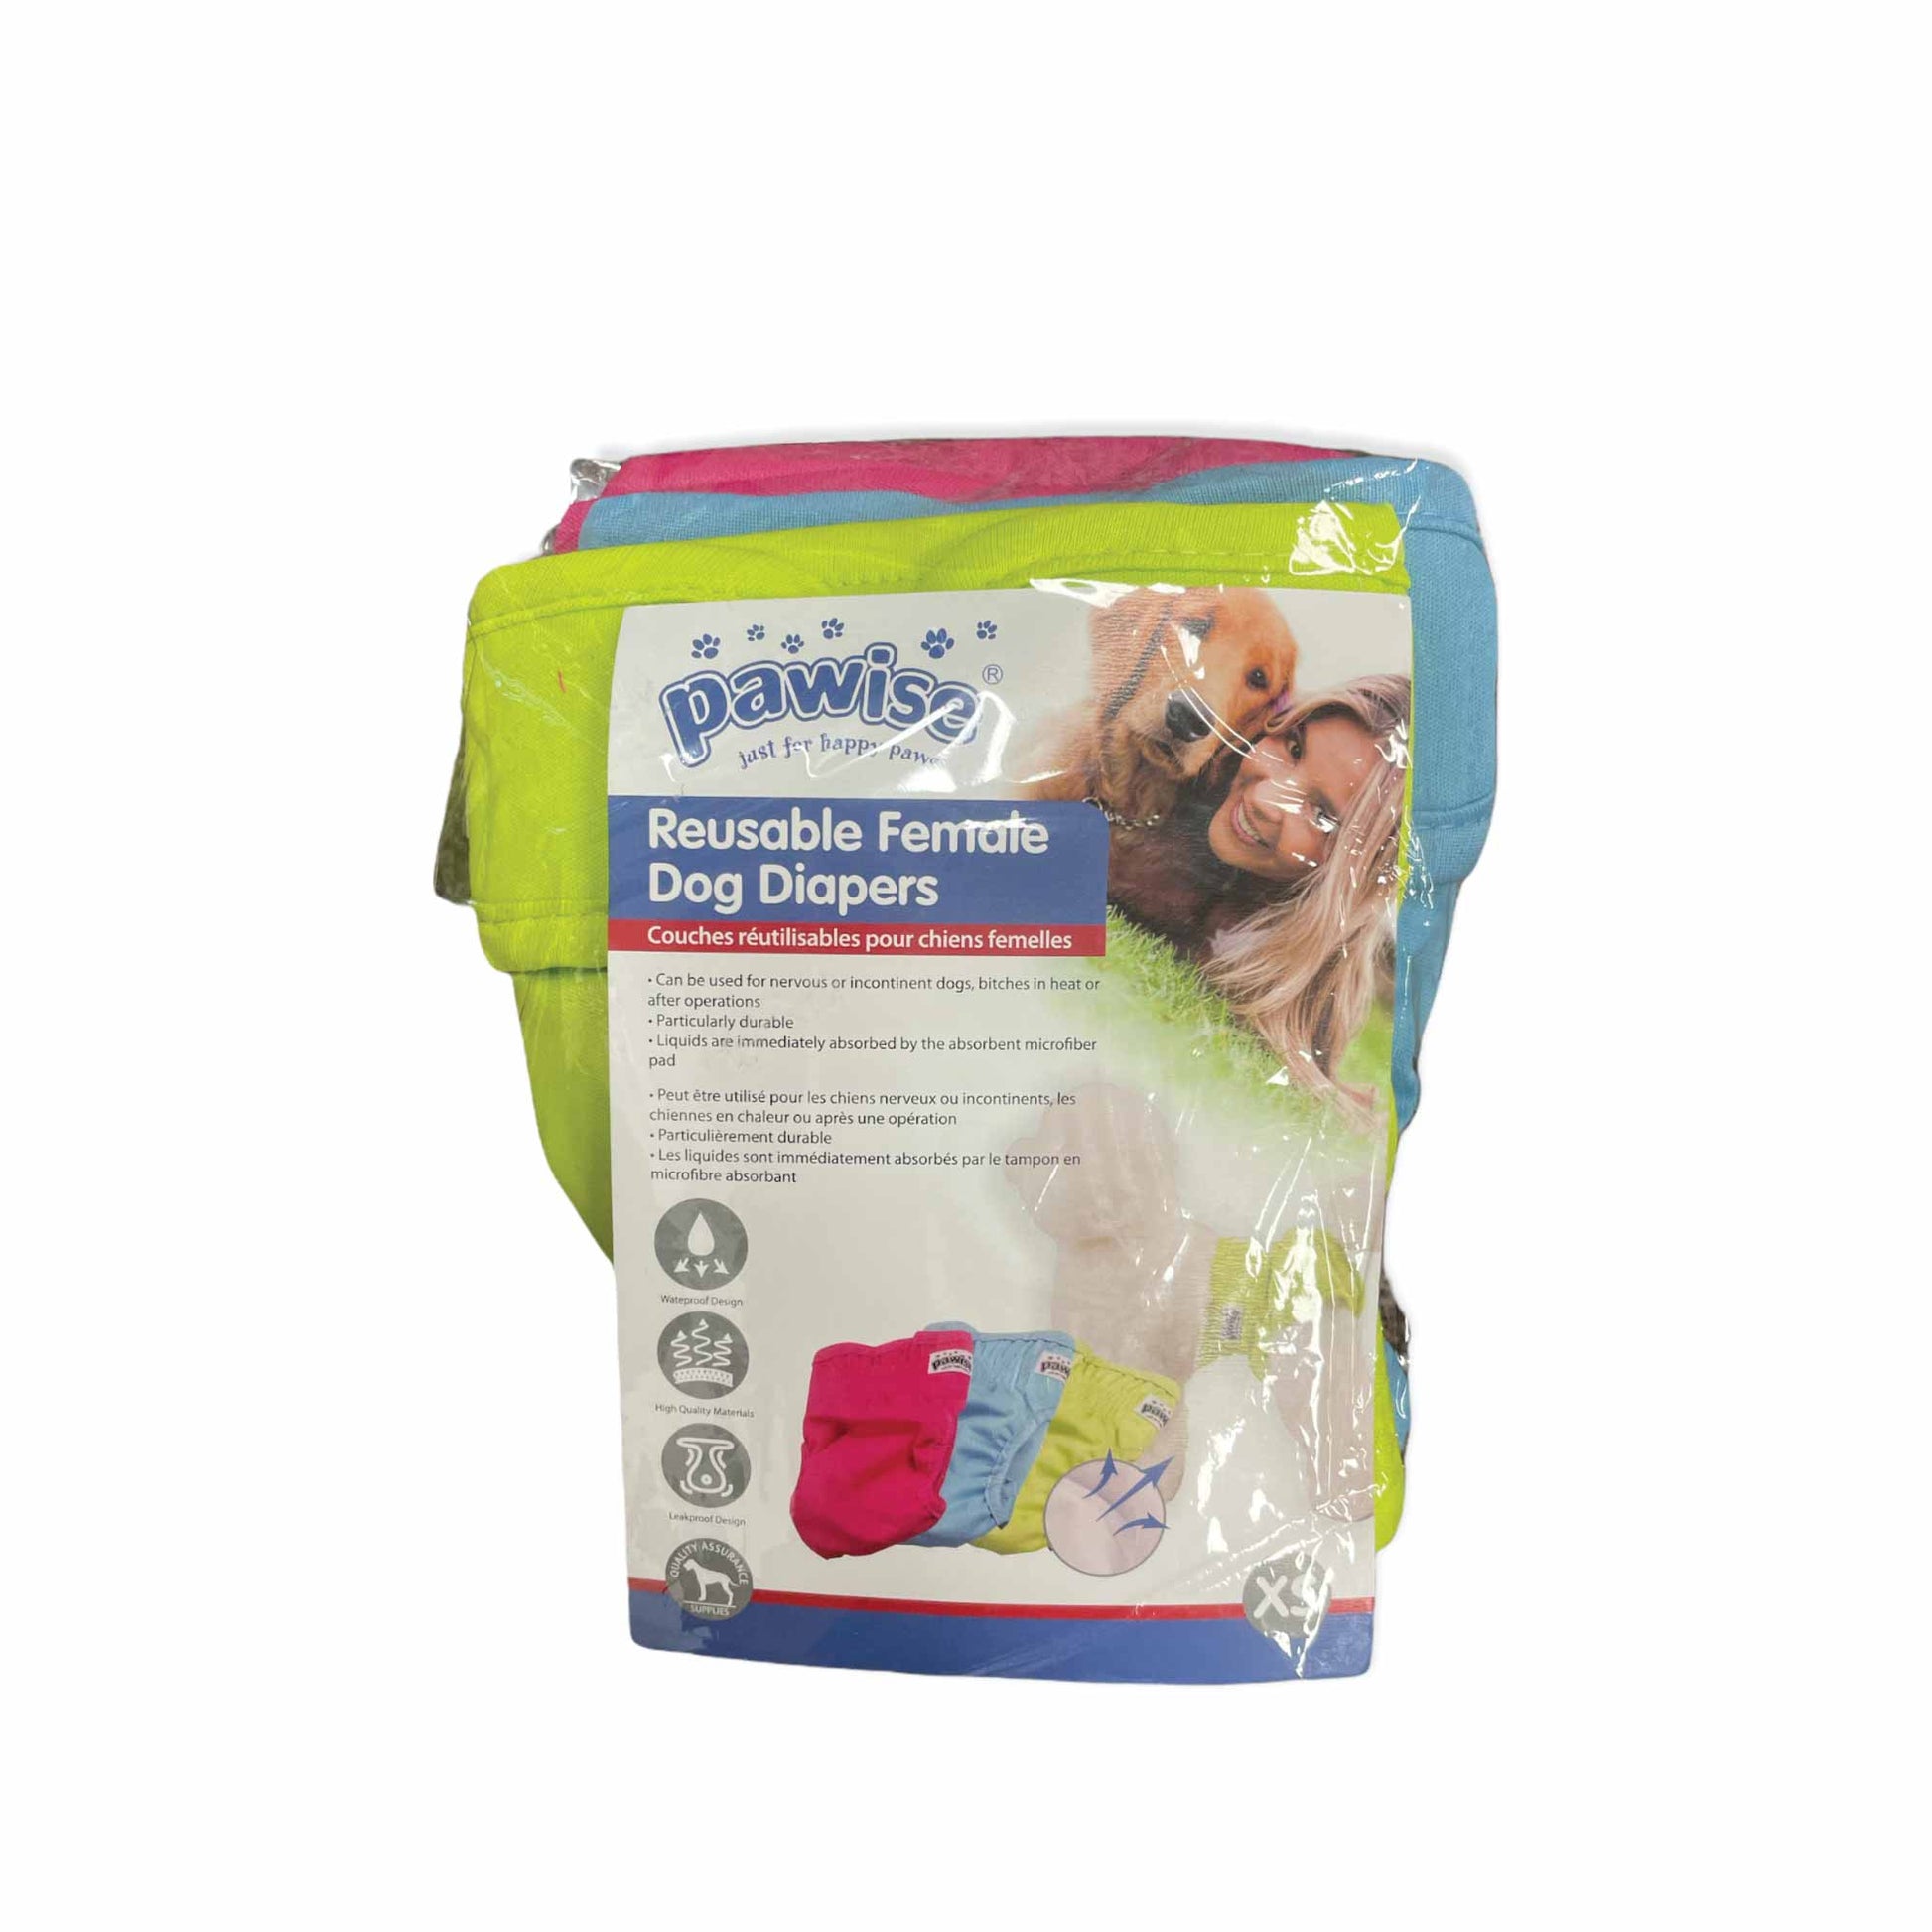 3 Pck Reusable Female Dog Diapers Puppy Nappy Eco Washable Period Incontinence Heat-10